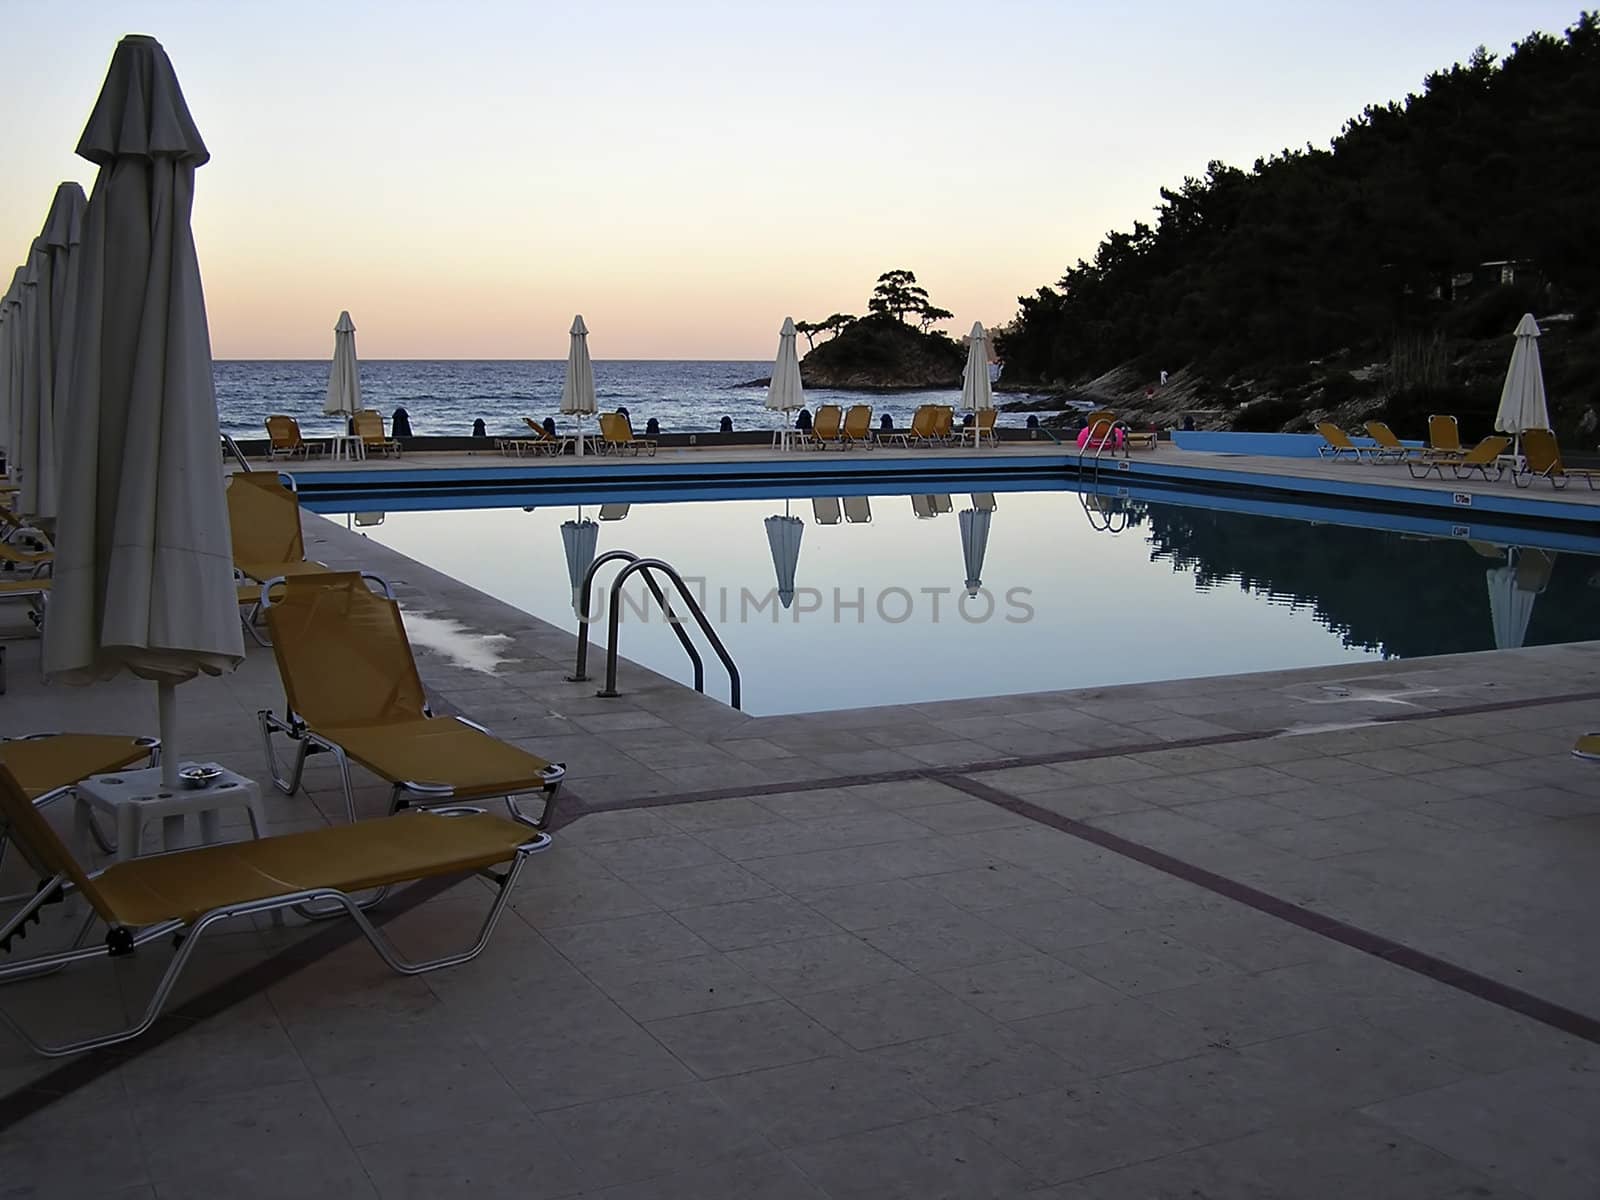 Swimming pool near coastline at the end of the day.